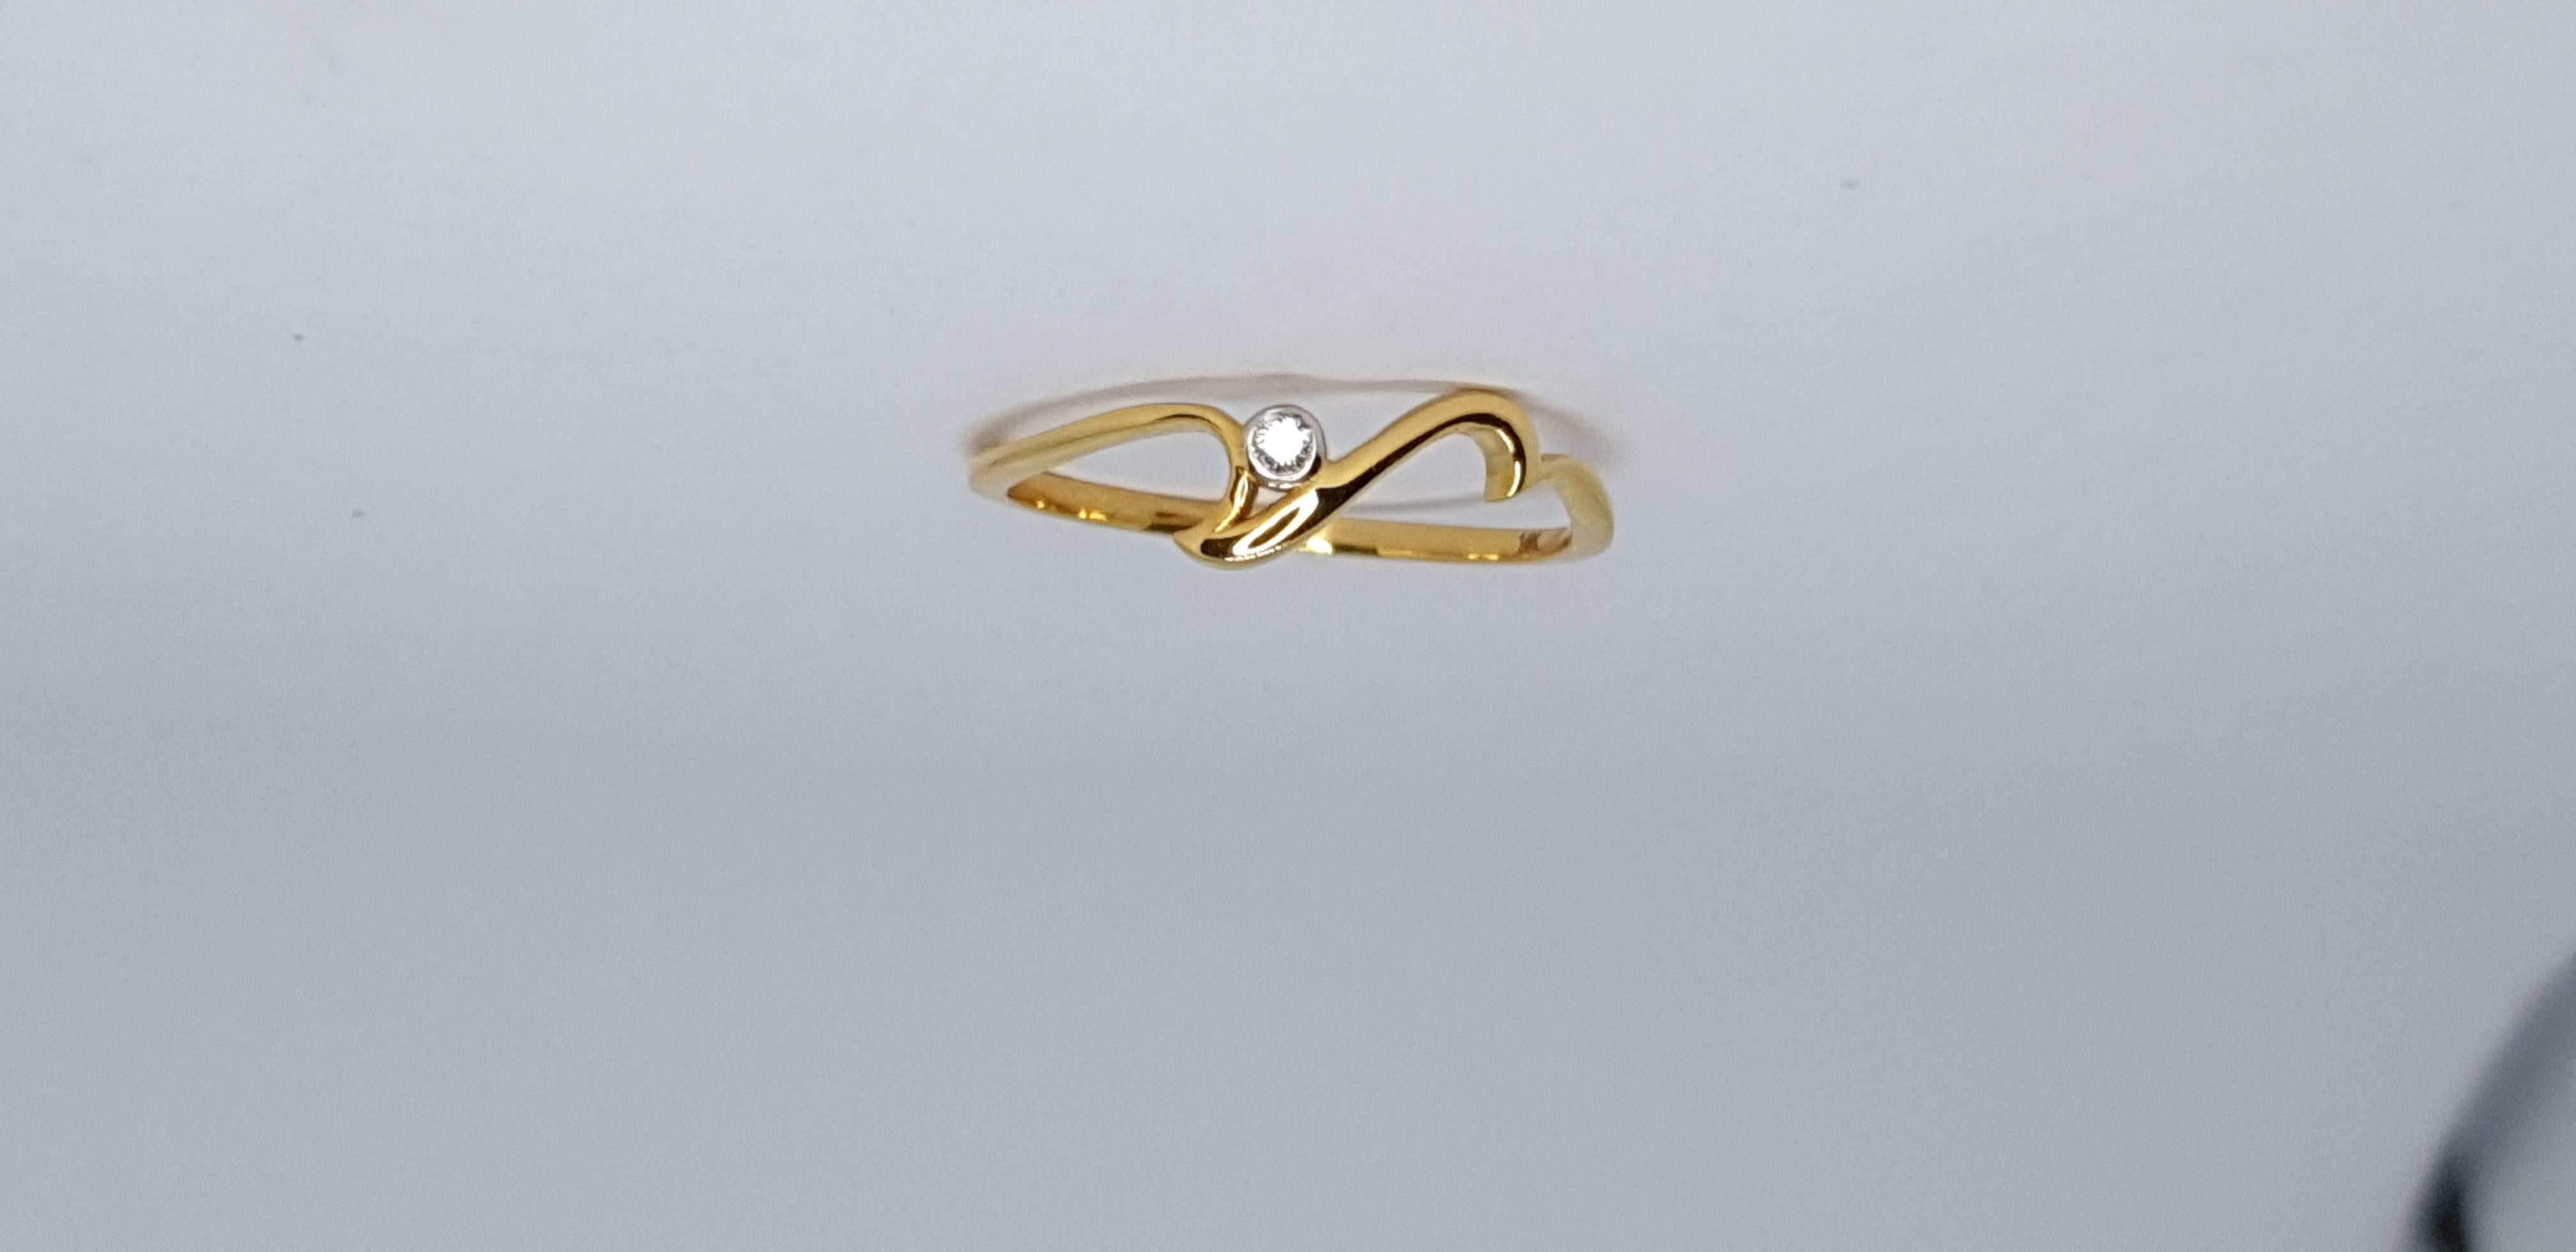 For Sale:  Natural Diamond Wave Ring 14K Solid Gold Dainty Ocean Lover Jewelry Gift. 3